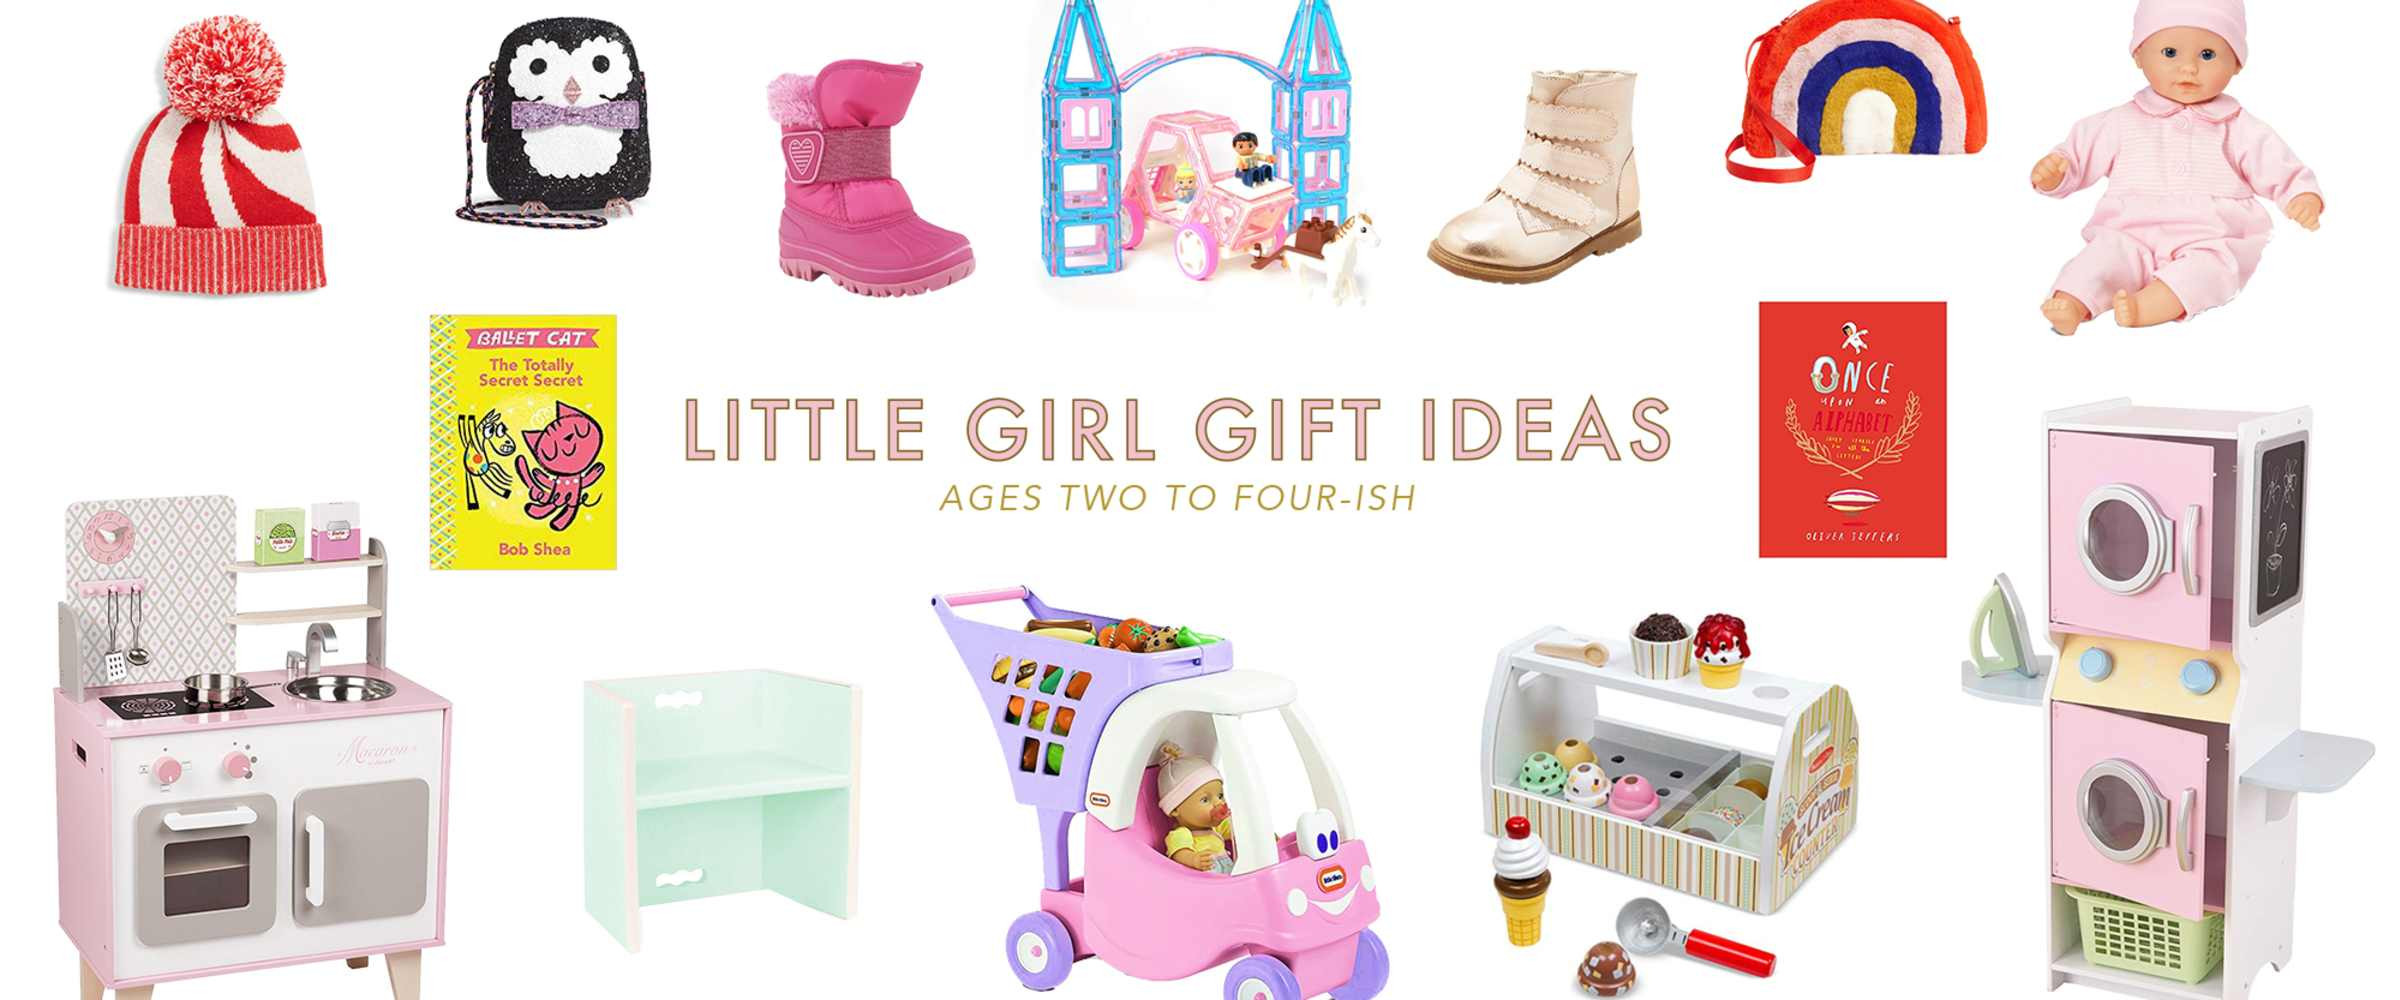 Gift Ideas For Girls Age 5
 Christmas Gift Ideas For Little Girls Ages 2 5 Lay Baby Lay